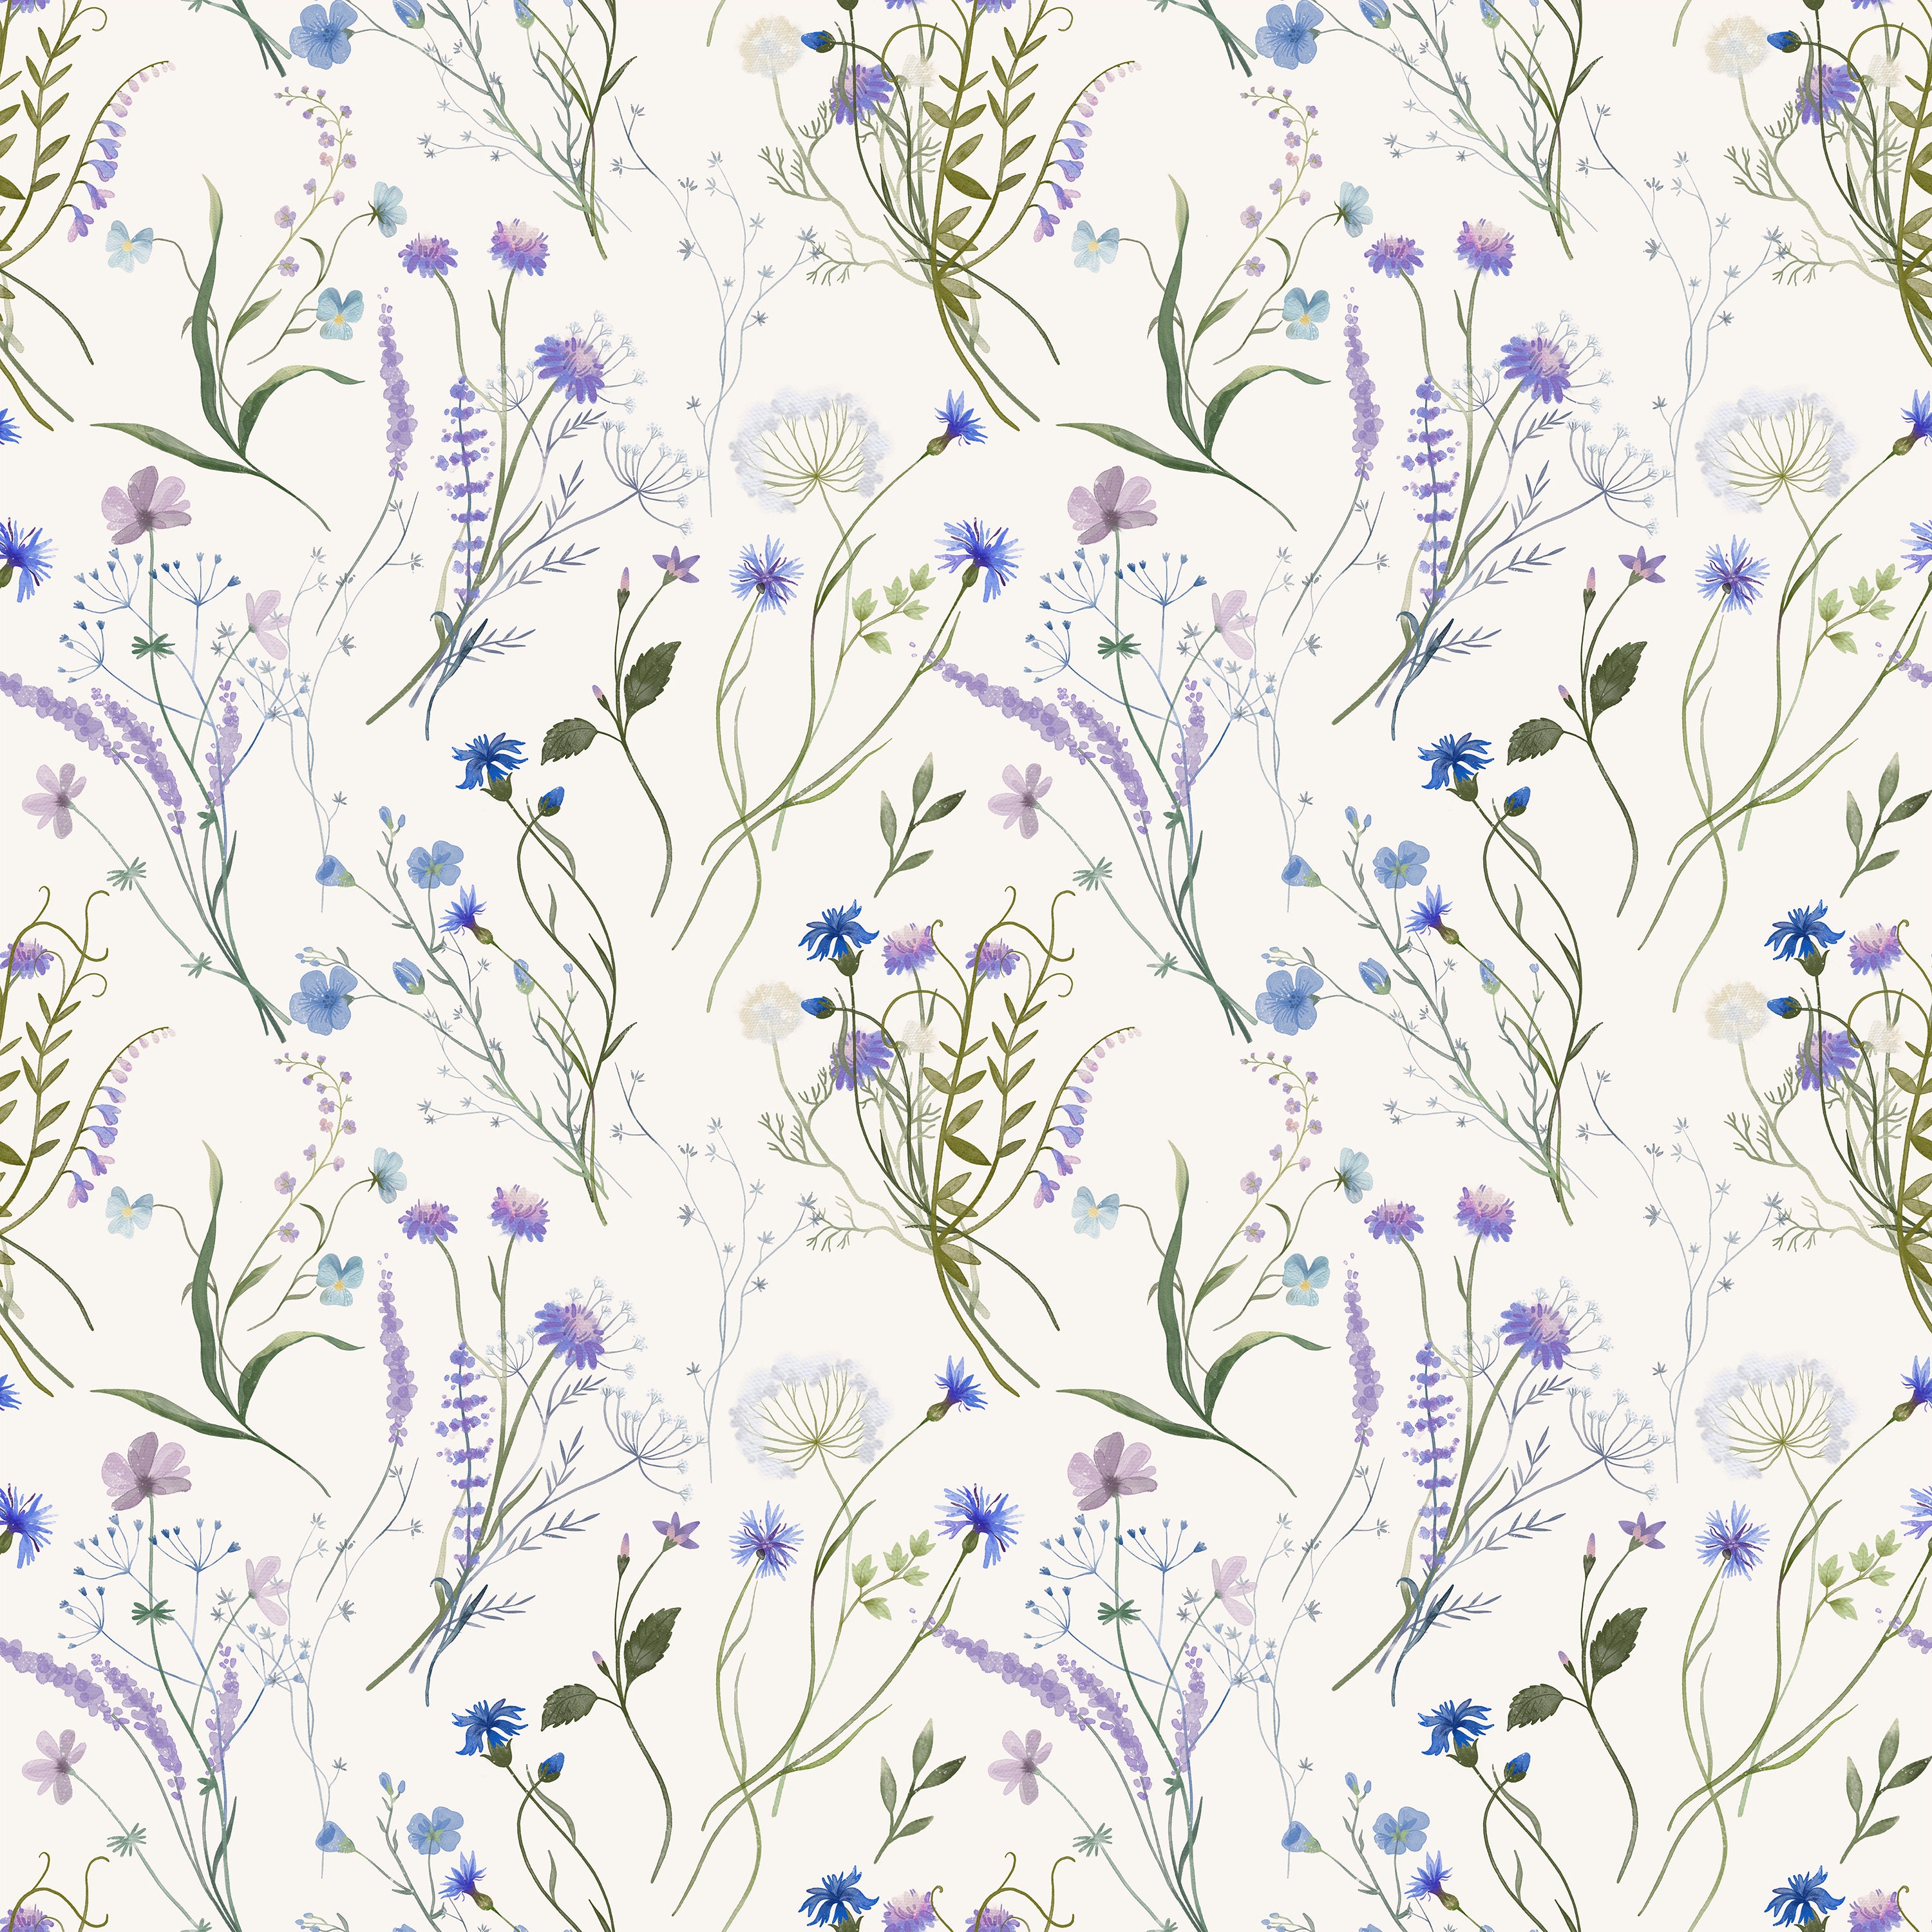 A close-up view of the Wildflower Bouquet Wallpaper, displaying a detailed and vibrant pattern of various wildflowers in blue and purple, intertwined with lush greenery, creating a refreshing and natural feel.